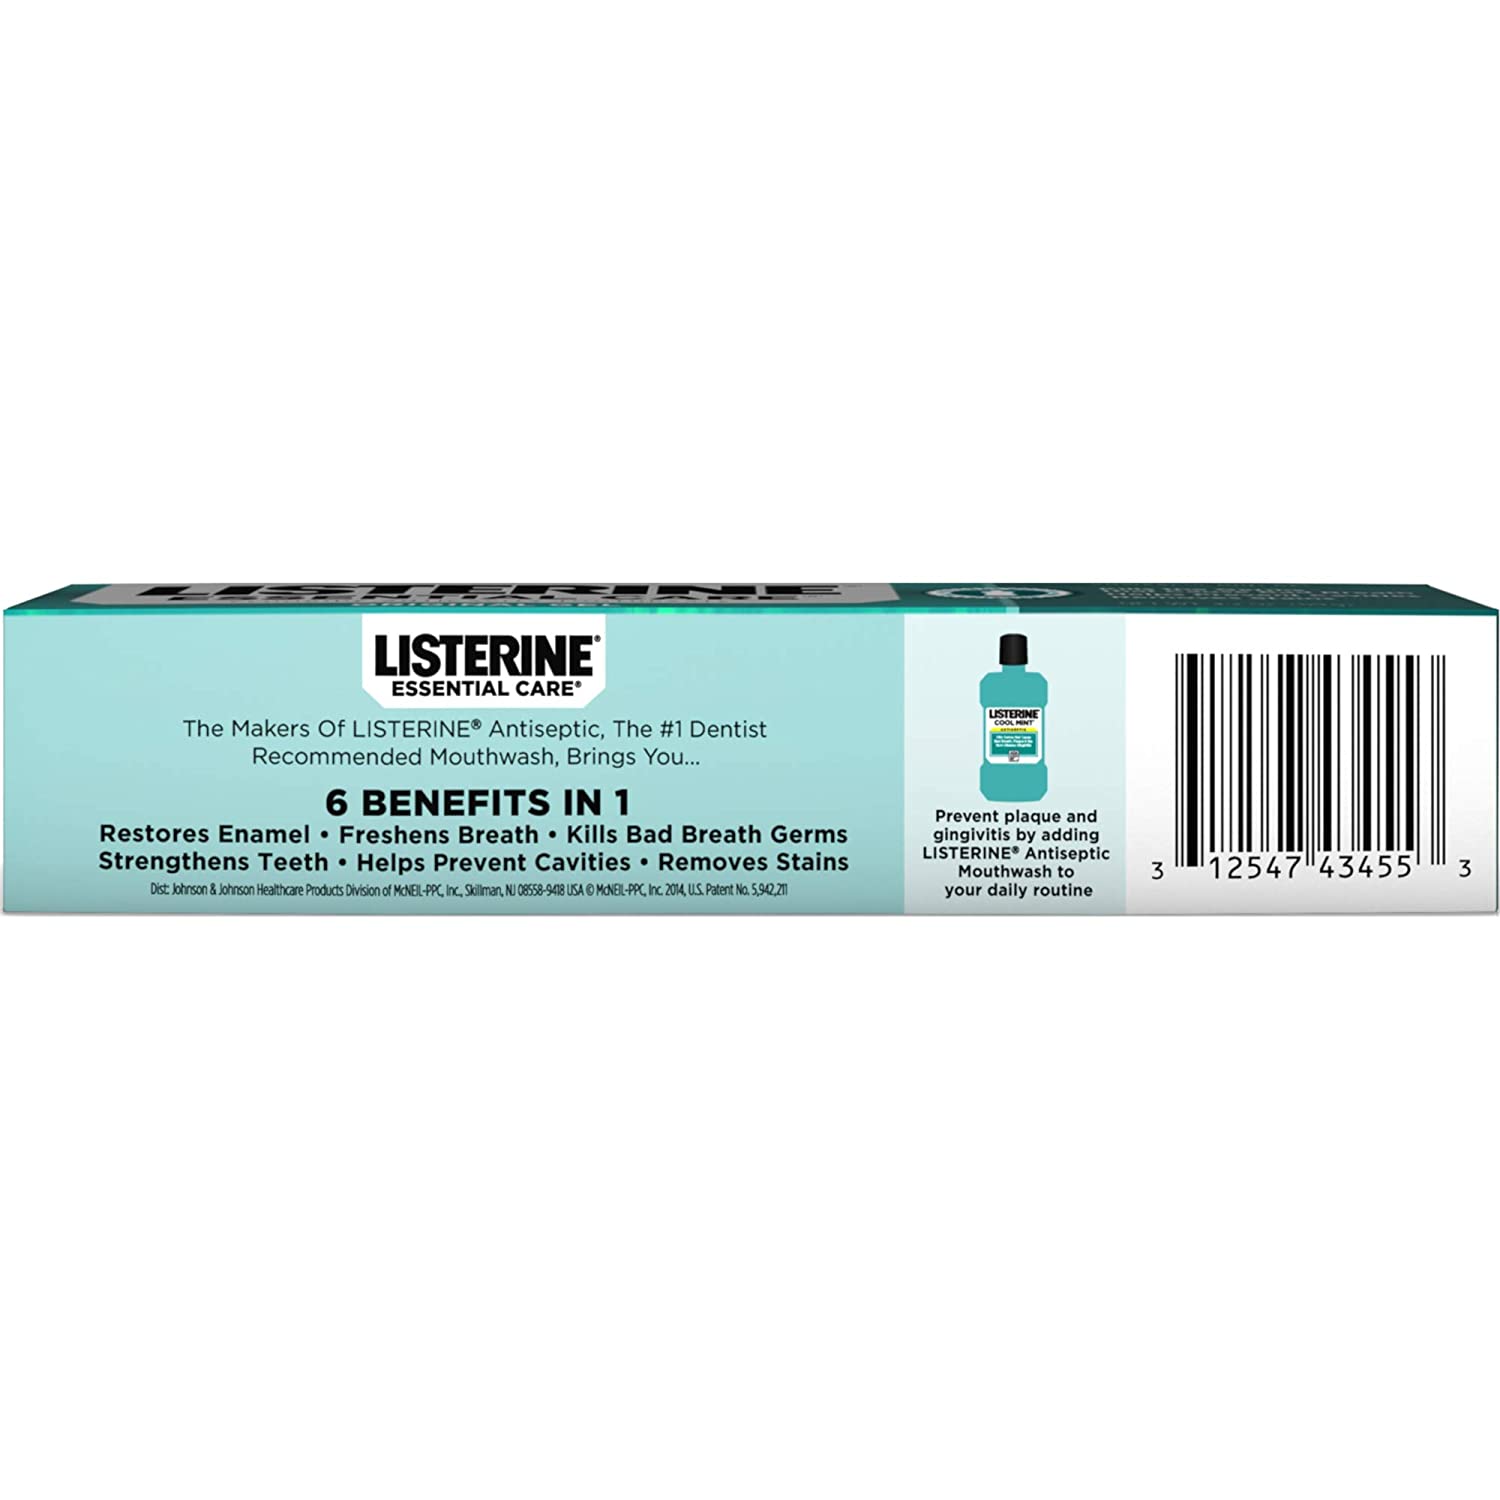 Listerine Essential Care Toothpaste Gel 4.20 oz (Pack of 2) - image 3 of 4